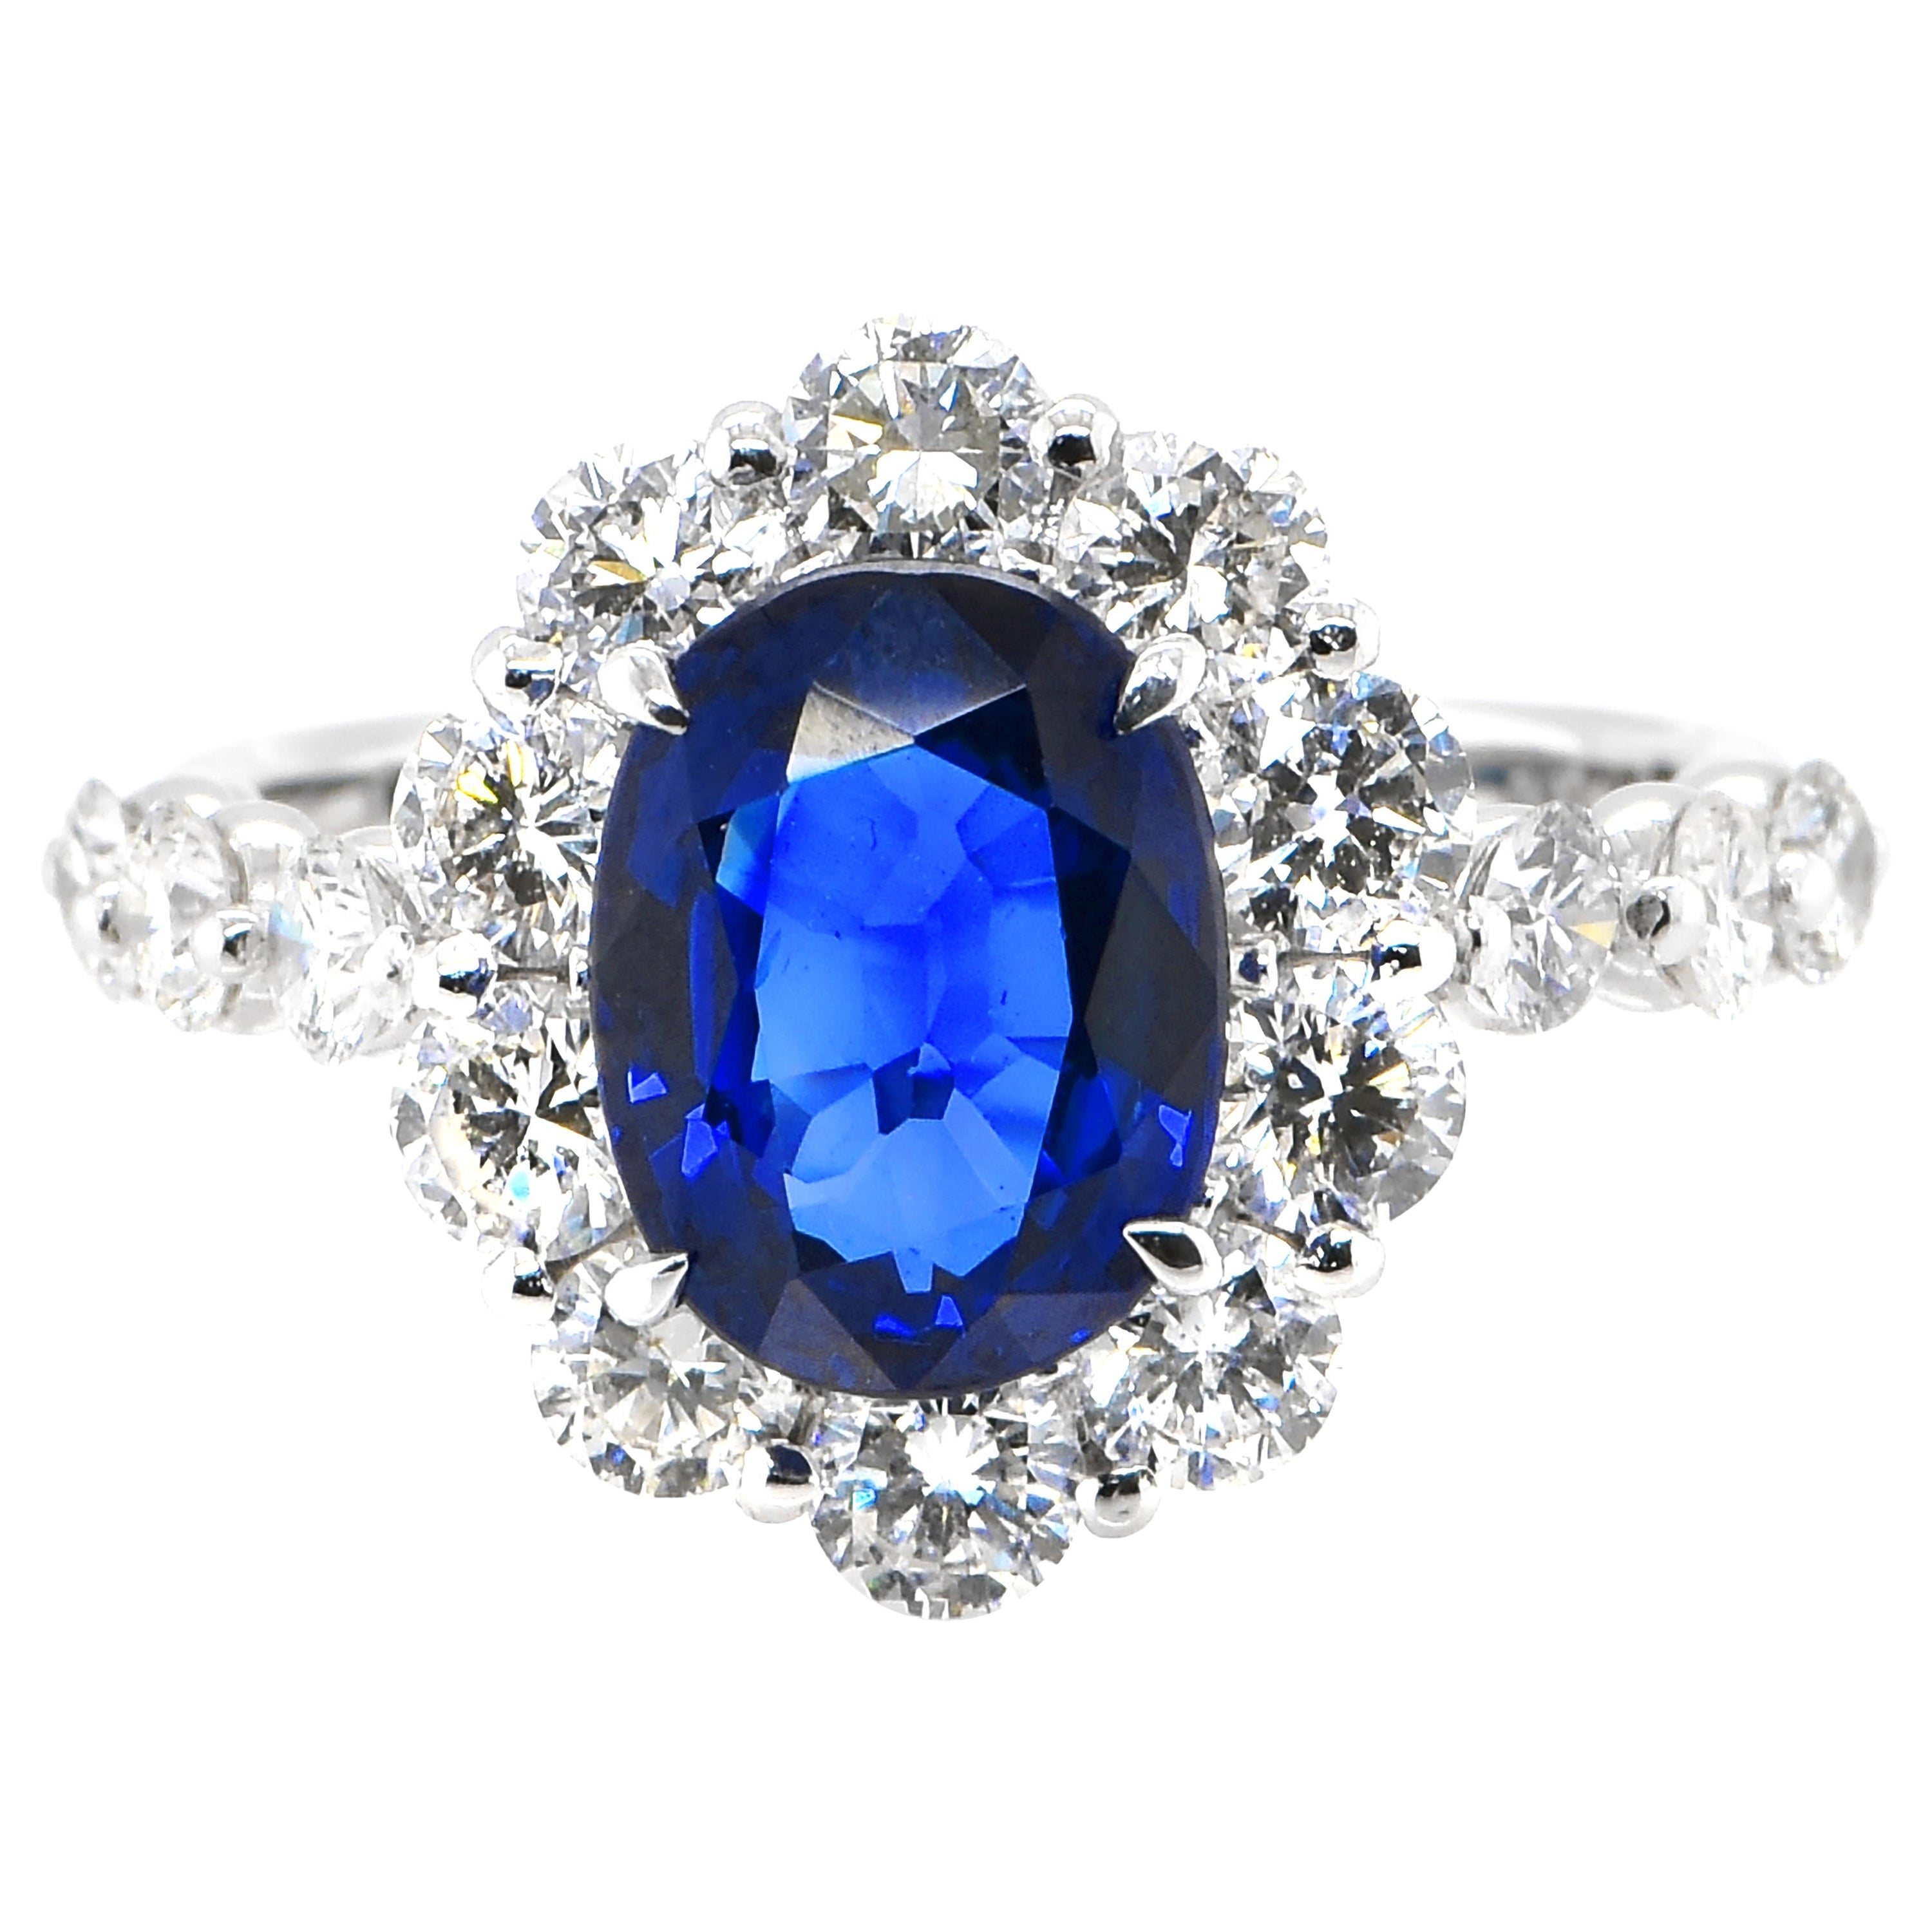 2.95 Carat Natural Royal Blue Sapphire and Diamond Halo Ring Made in Platinum